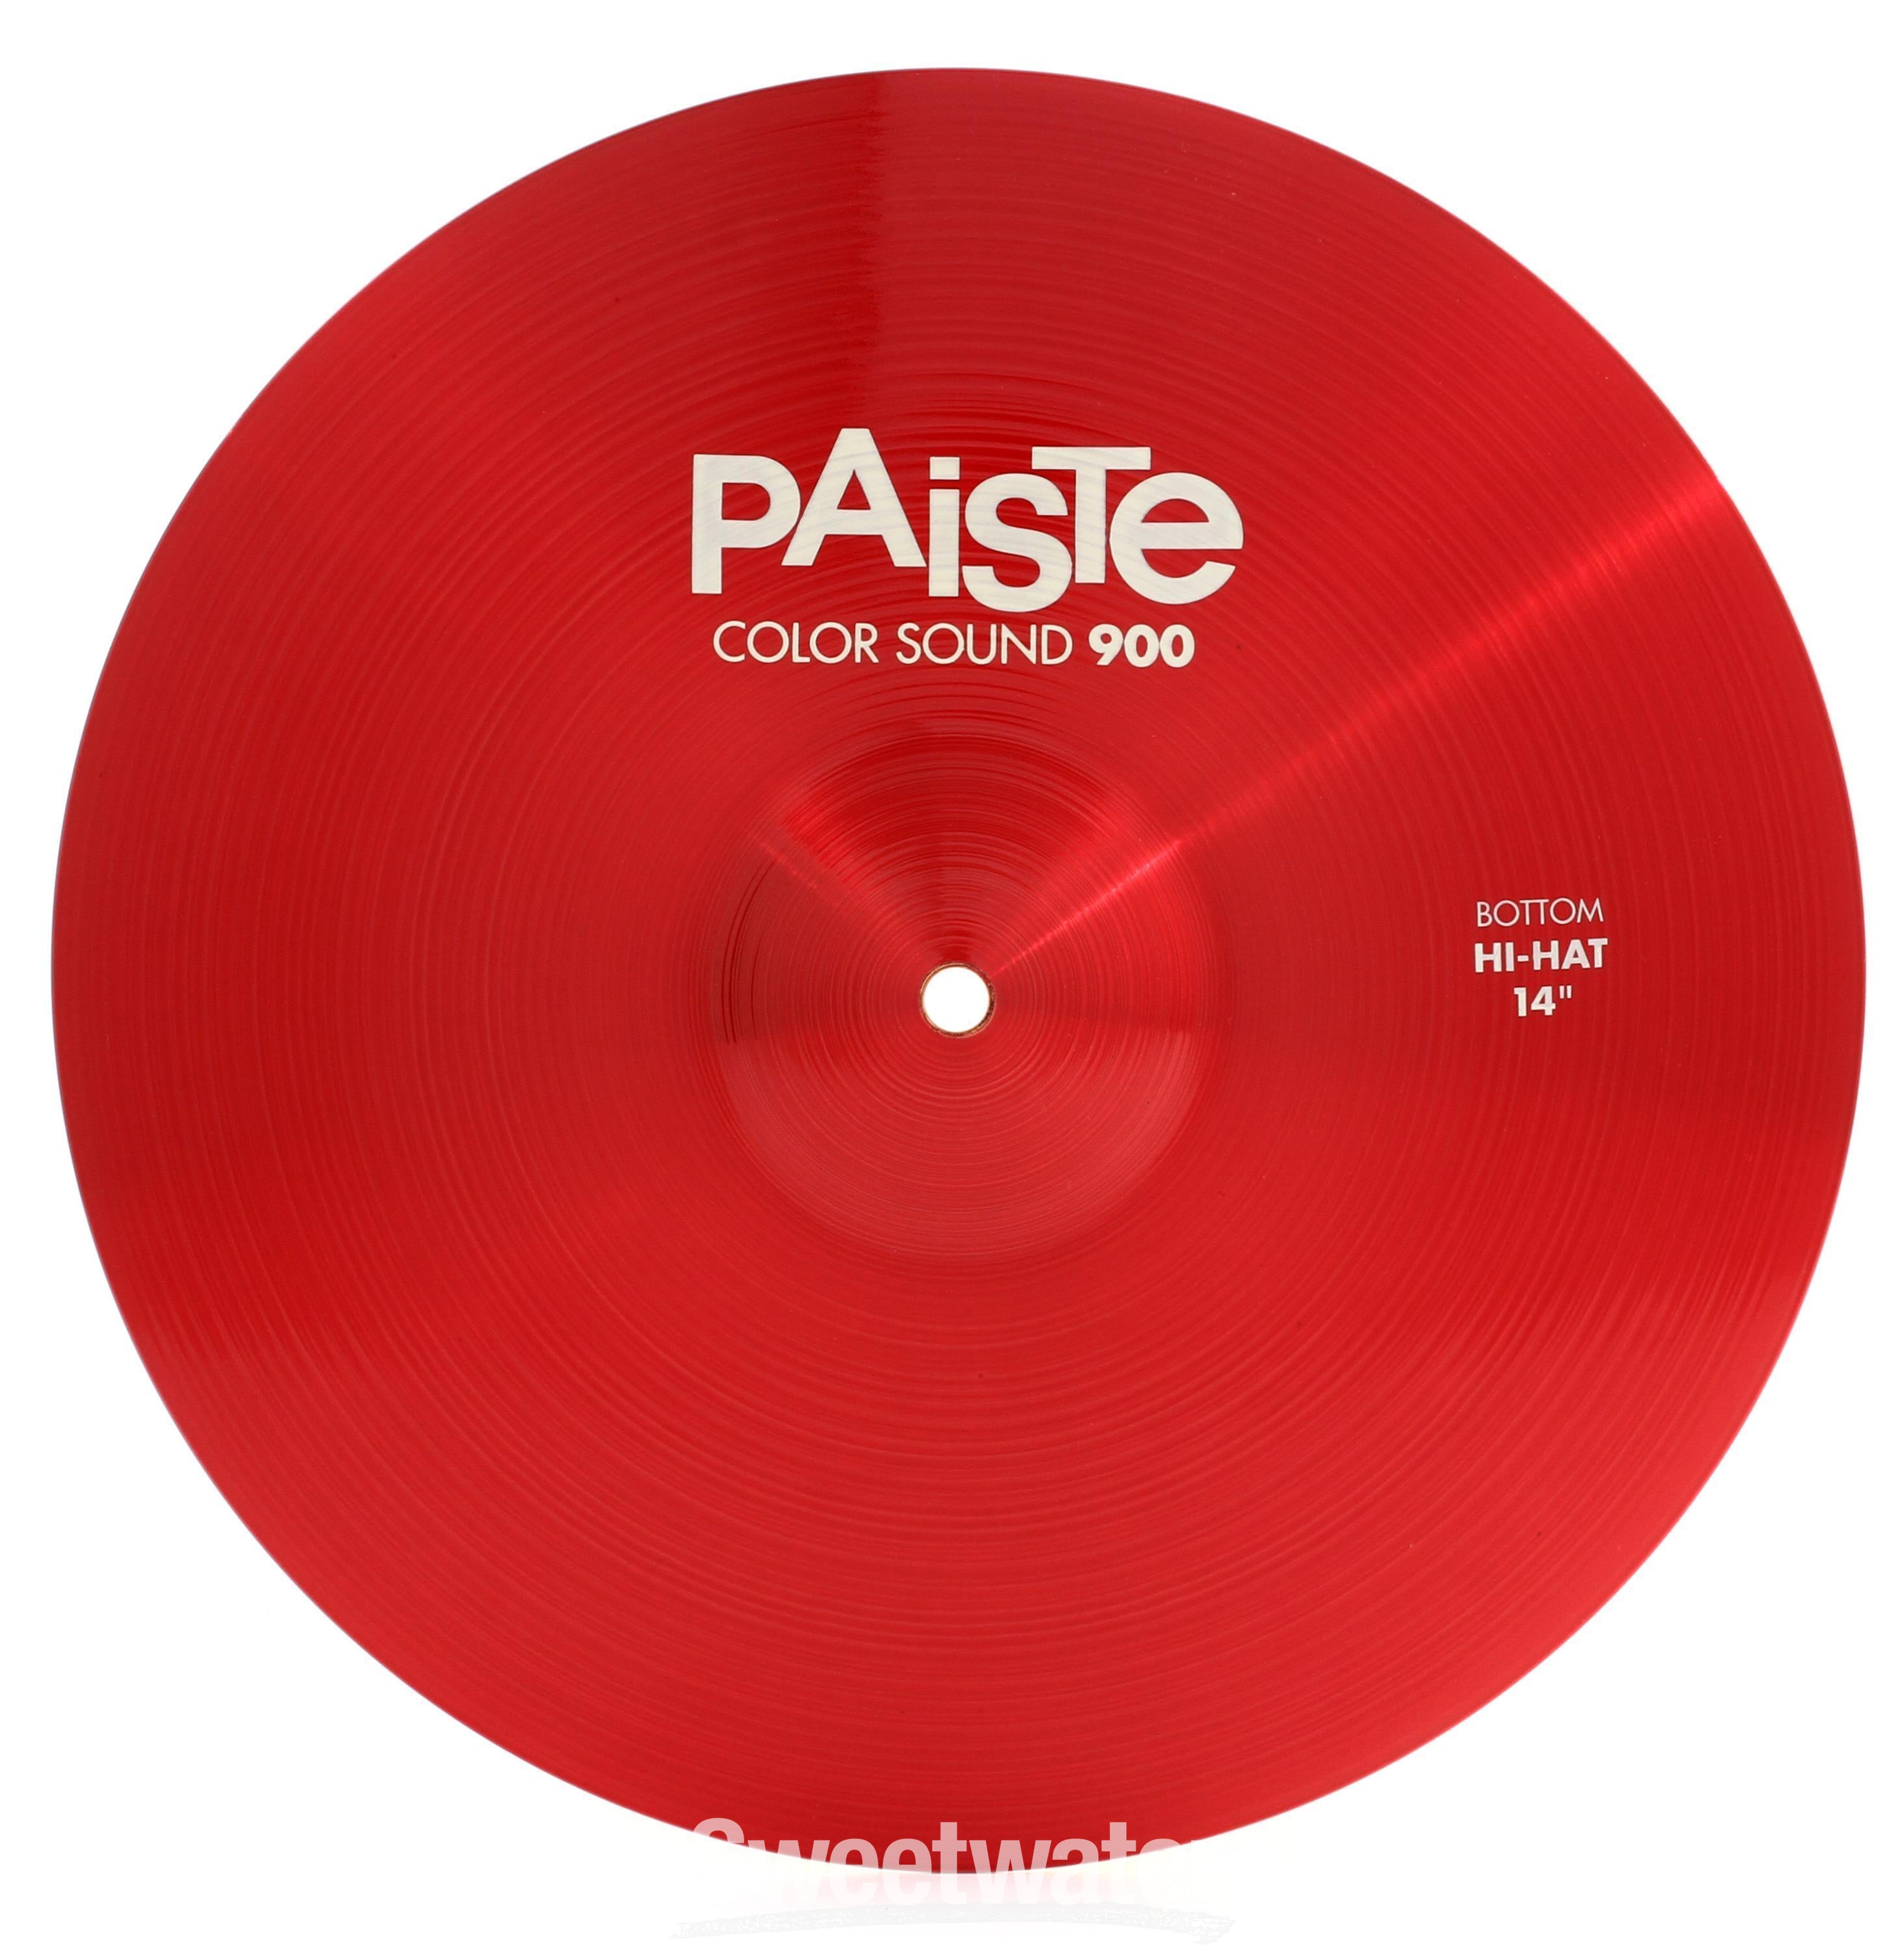 Paiste 14 inch Color Sound 900 Red Hi-hat Cymbals | Sweetwater